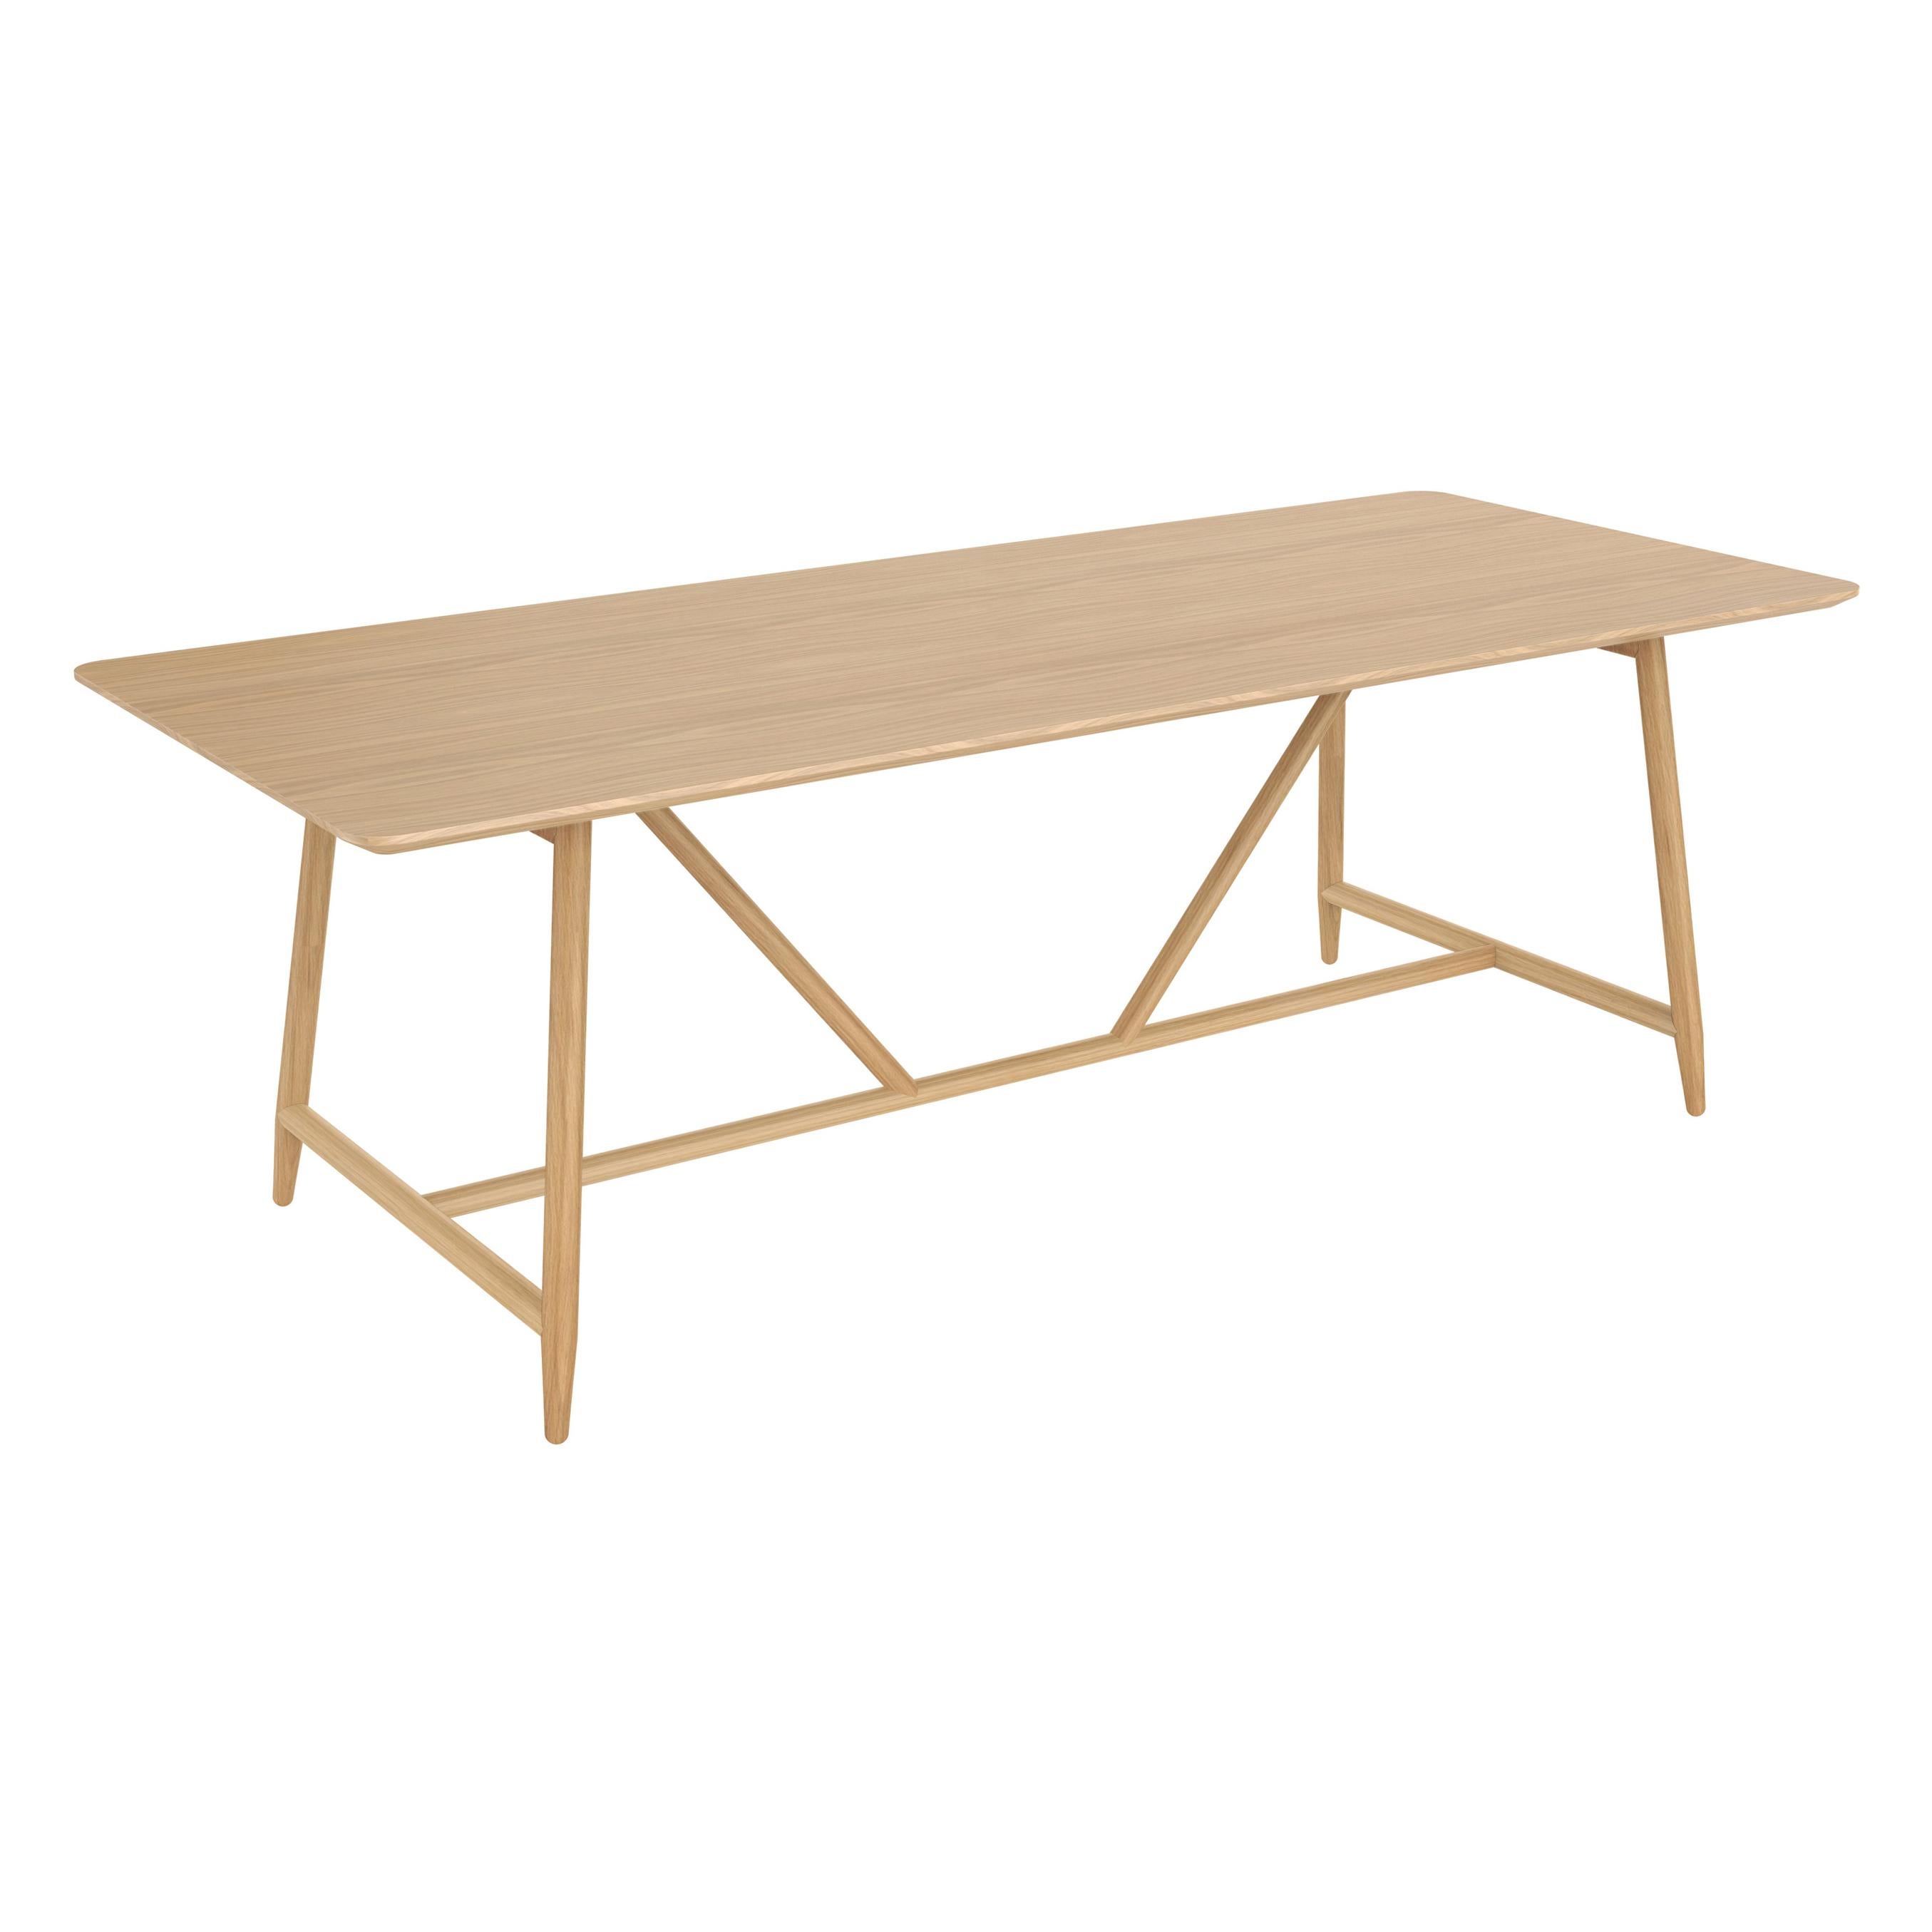 Dal Dining Table, Contemporary Modern Minimalist Wooden Oak